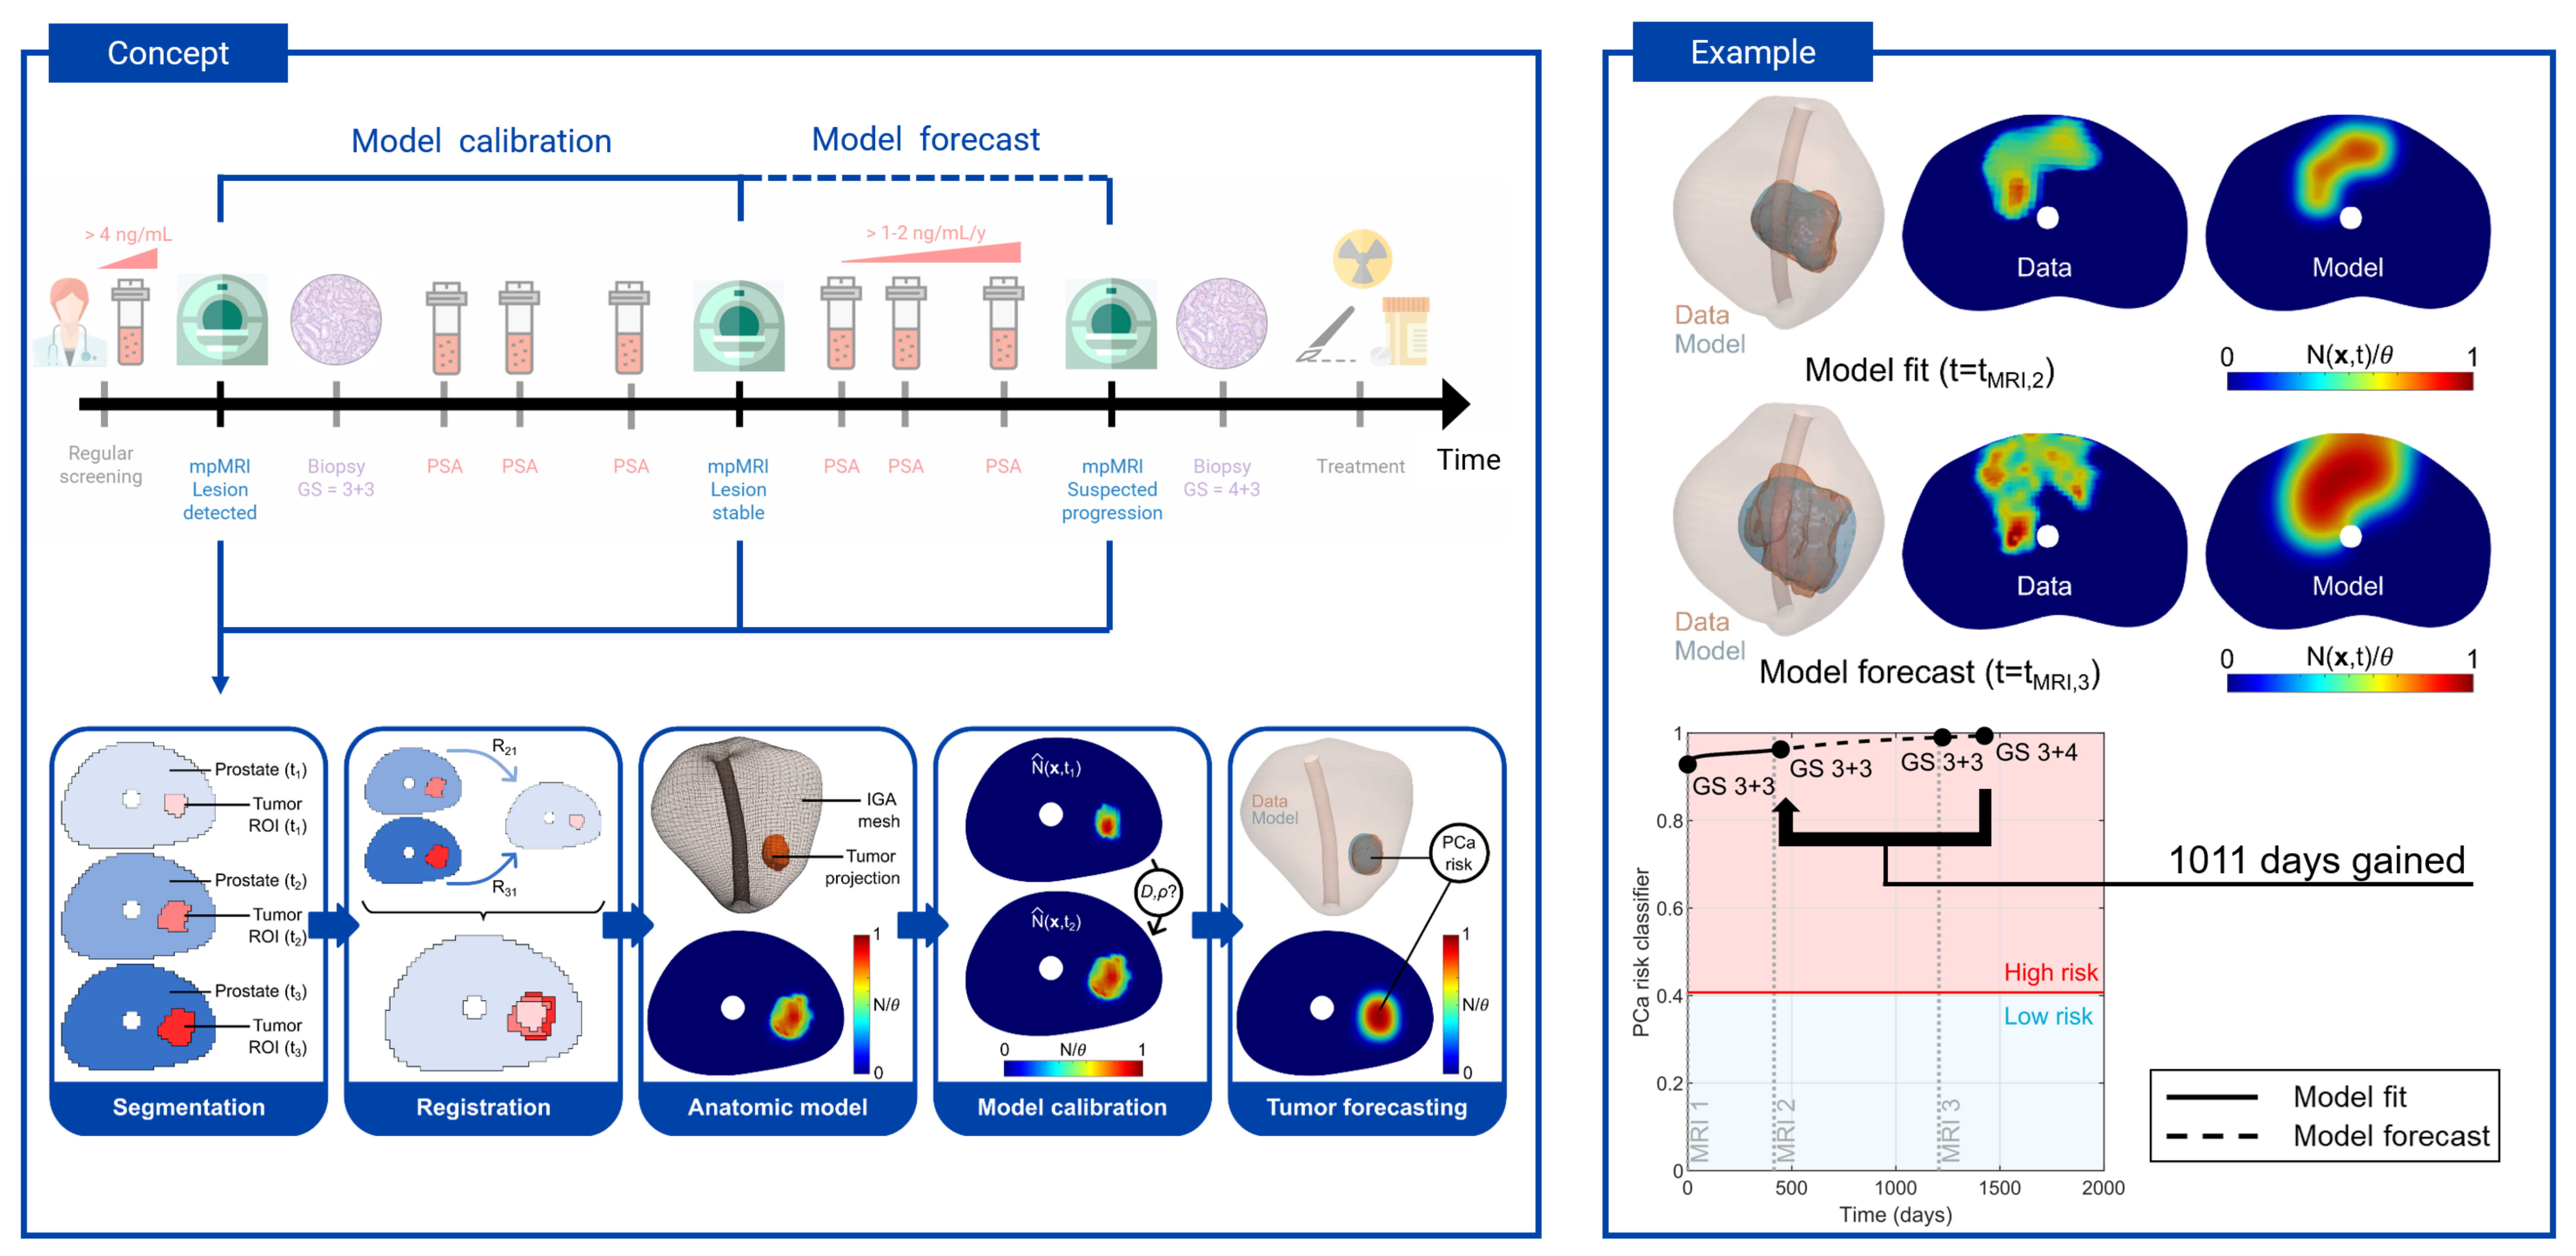 Examples of personalized predictions of prostate cancer growth using a biomechanistic model.